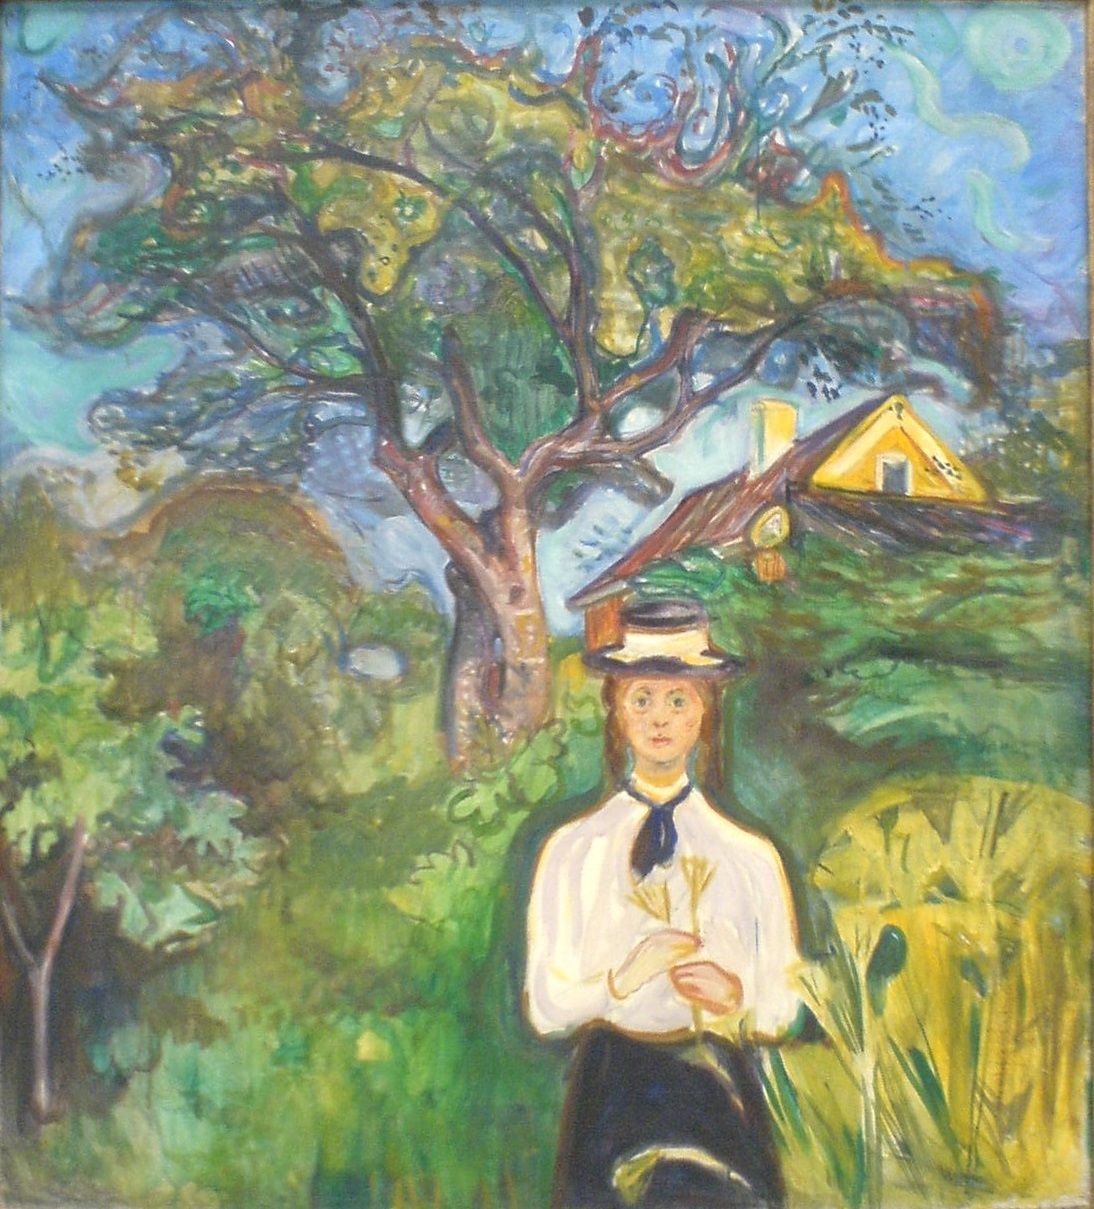 A girl standing in front of an apple tree with a house visible in the background